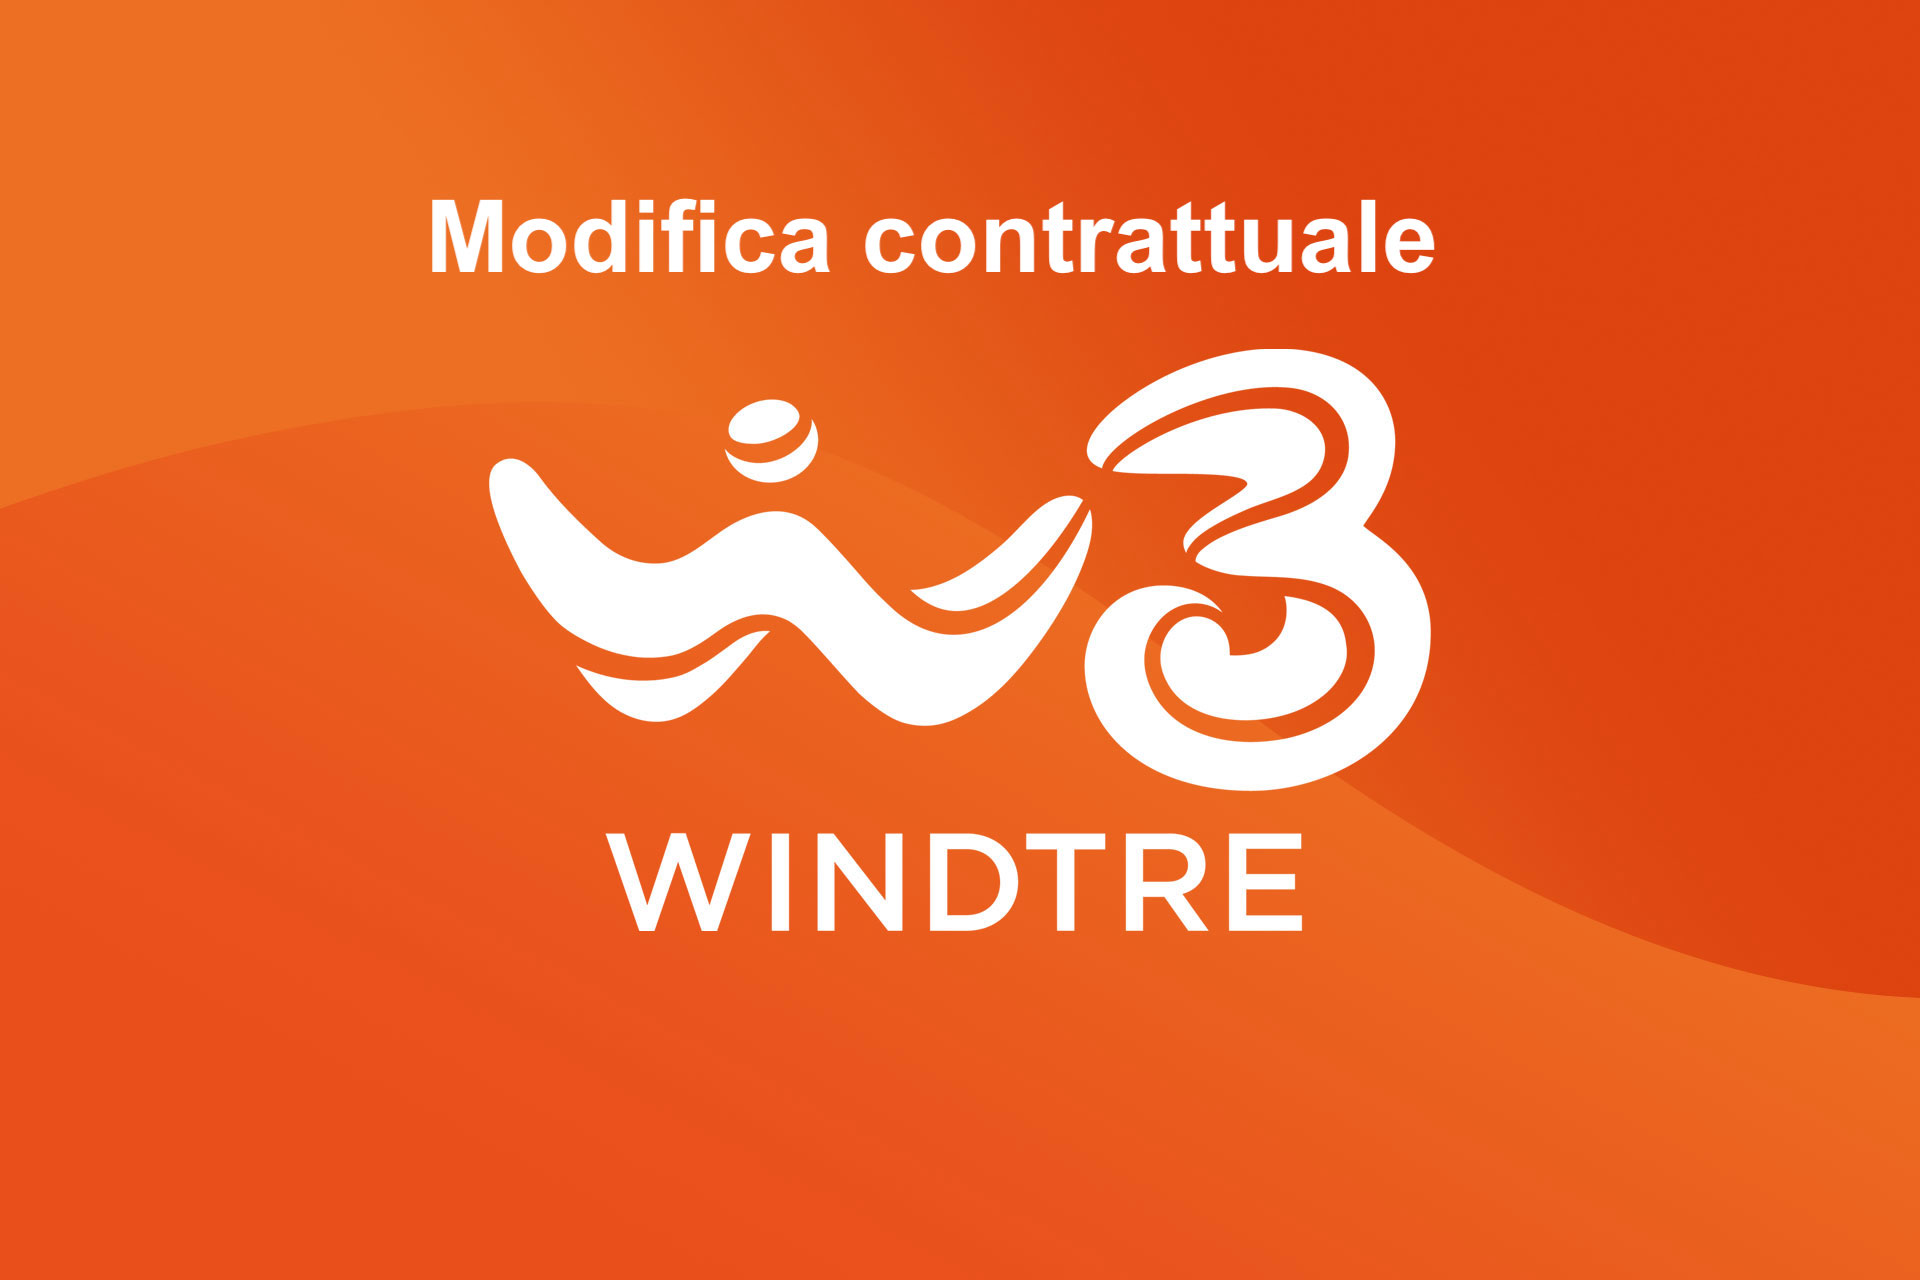 WINDTRE, those that can pay between €2 and €3 go up on their landline